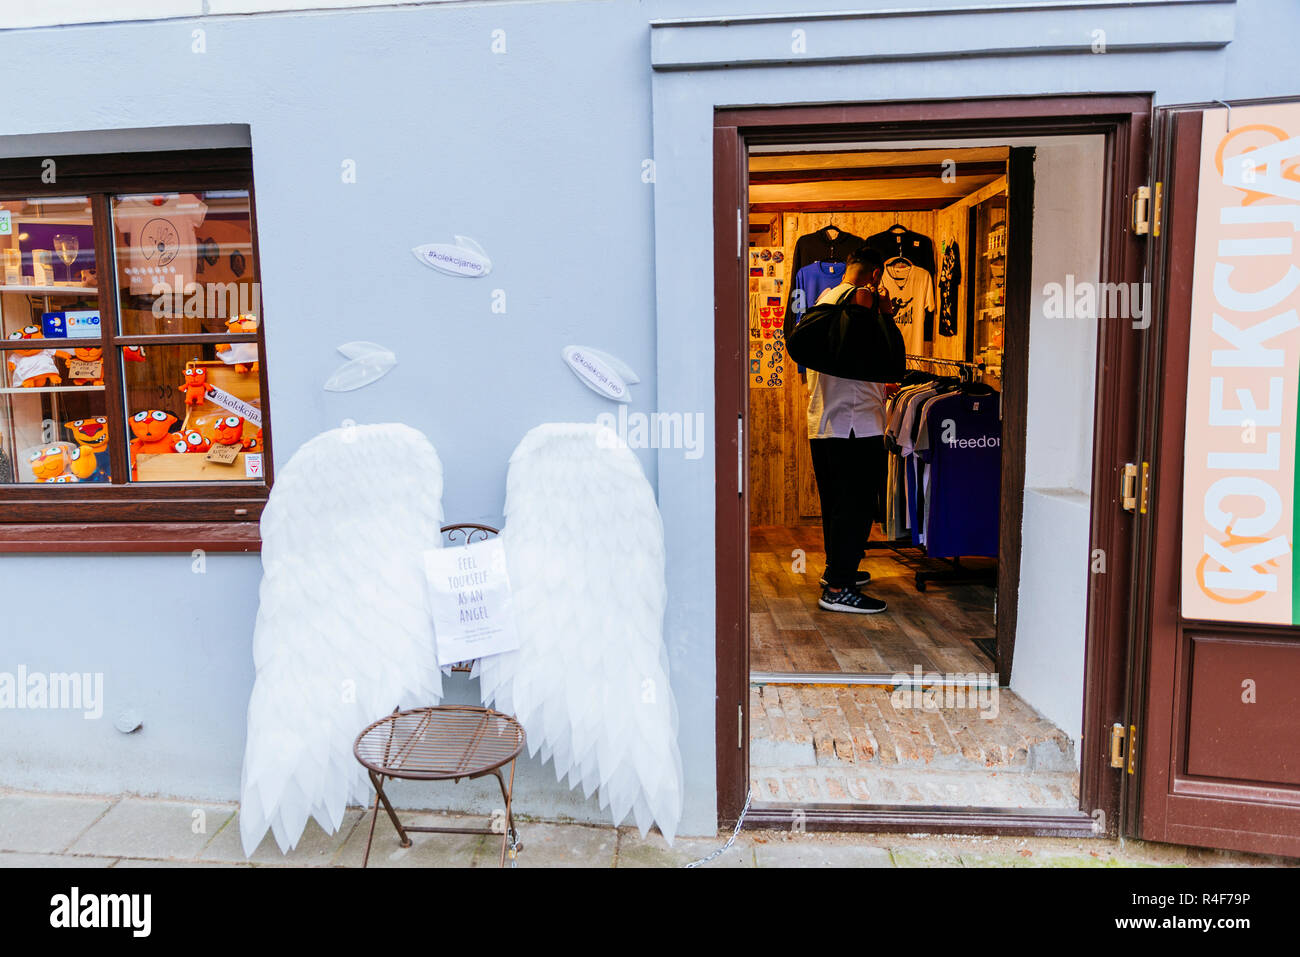 Angel wings at the entrance of a fashion store. Uzupis is a neighborhood in Vilnius, on April 1, 1997, the district declared itself an independent rep Stock Photo